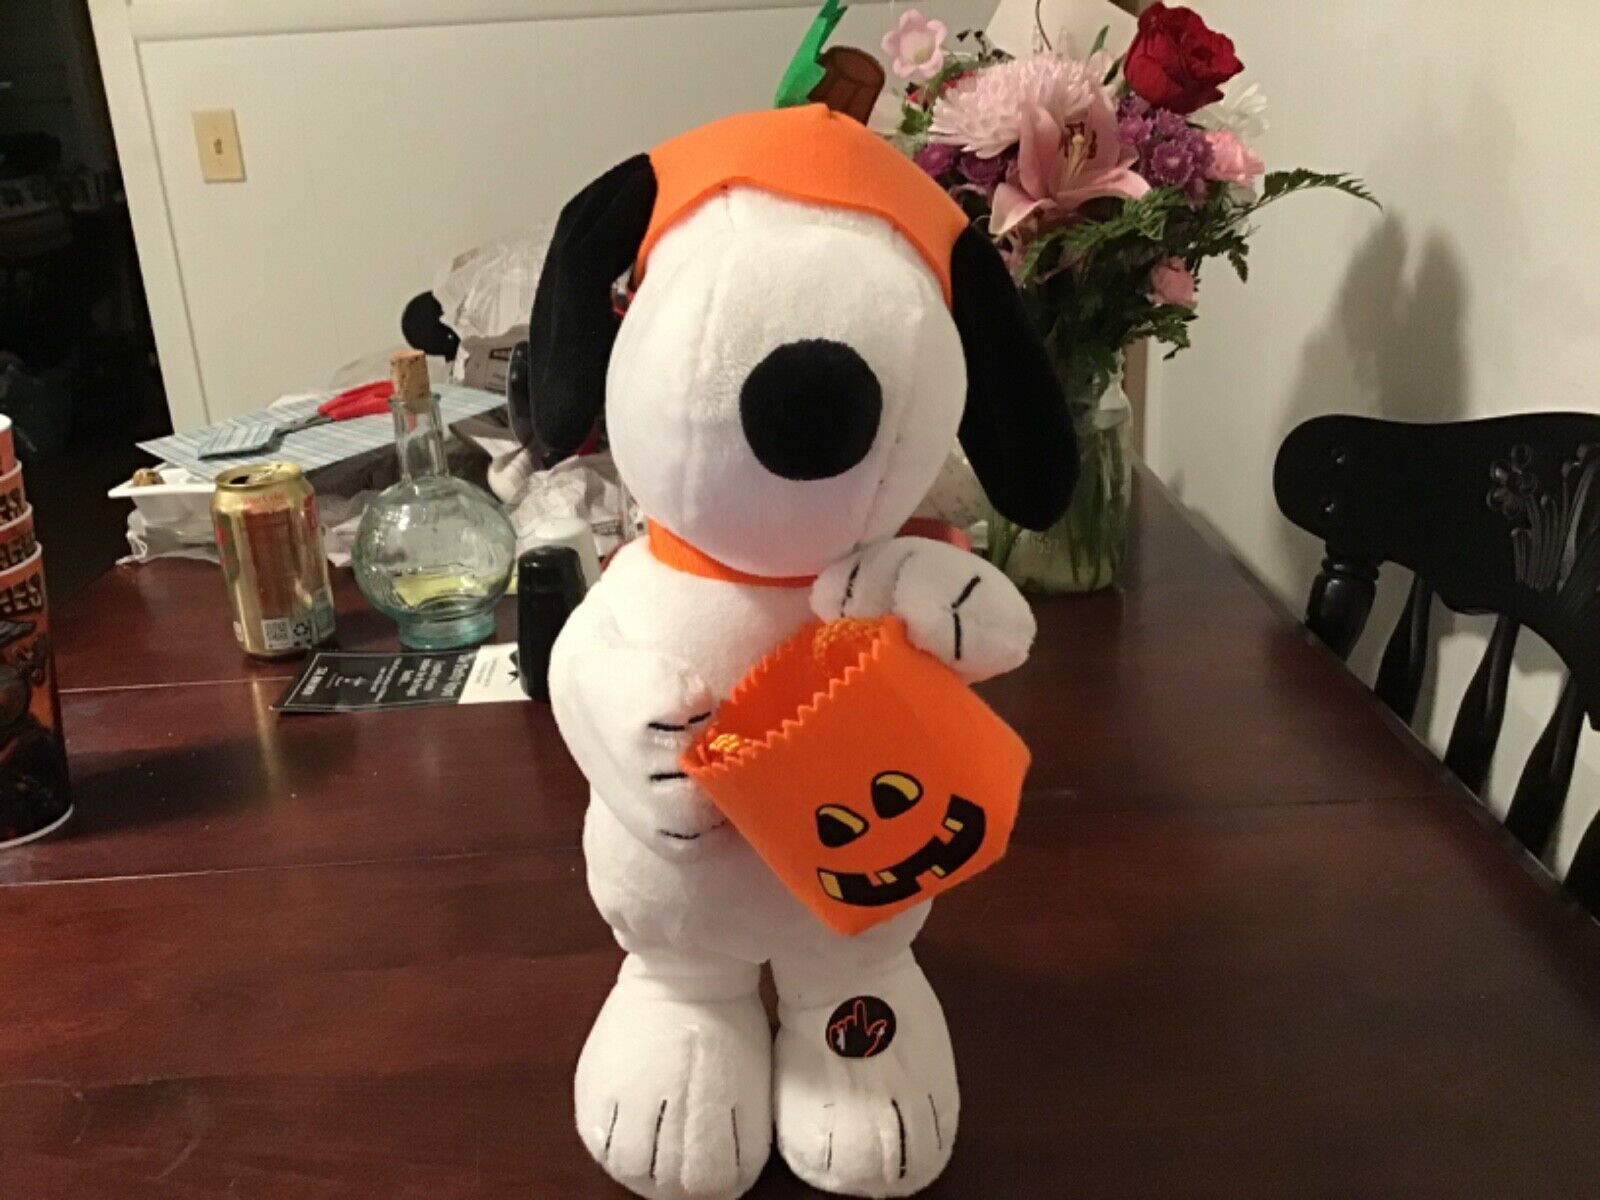 2015 Peanuts Snoopy Dancing to Peanuts Theme Song